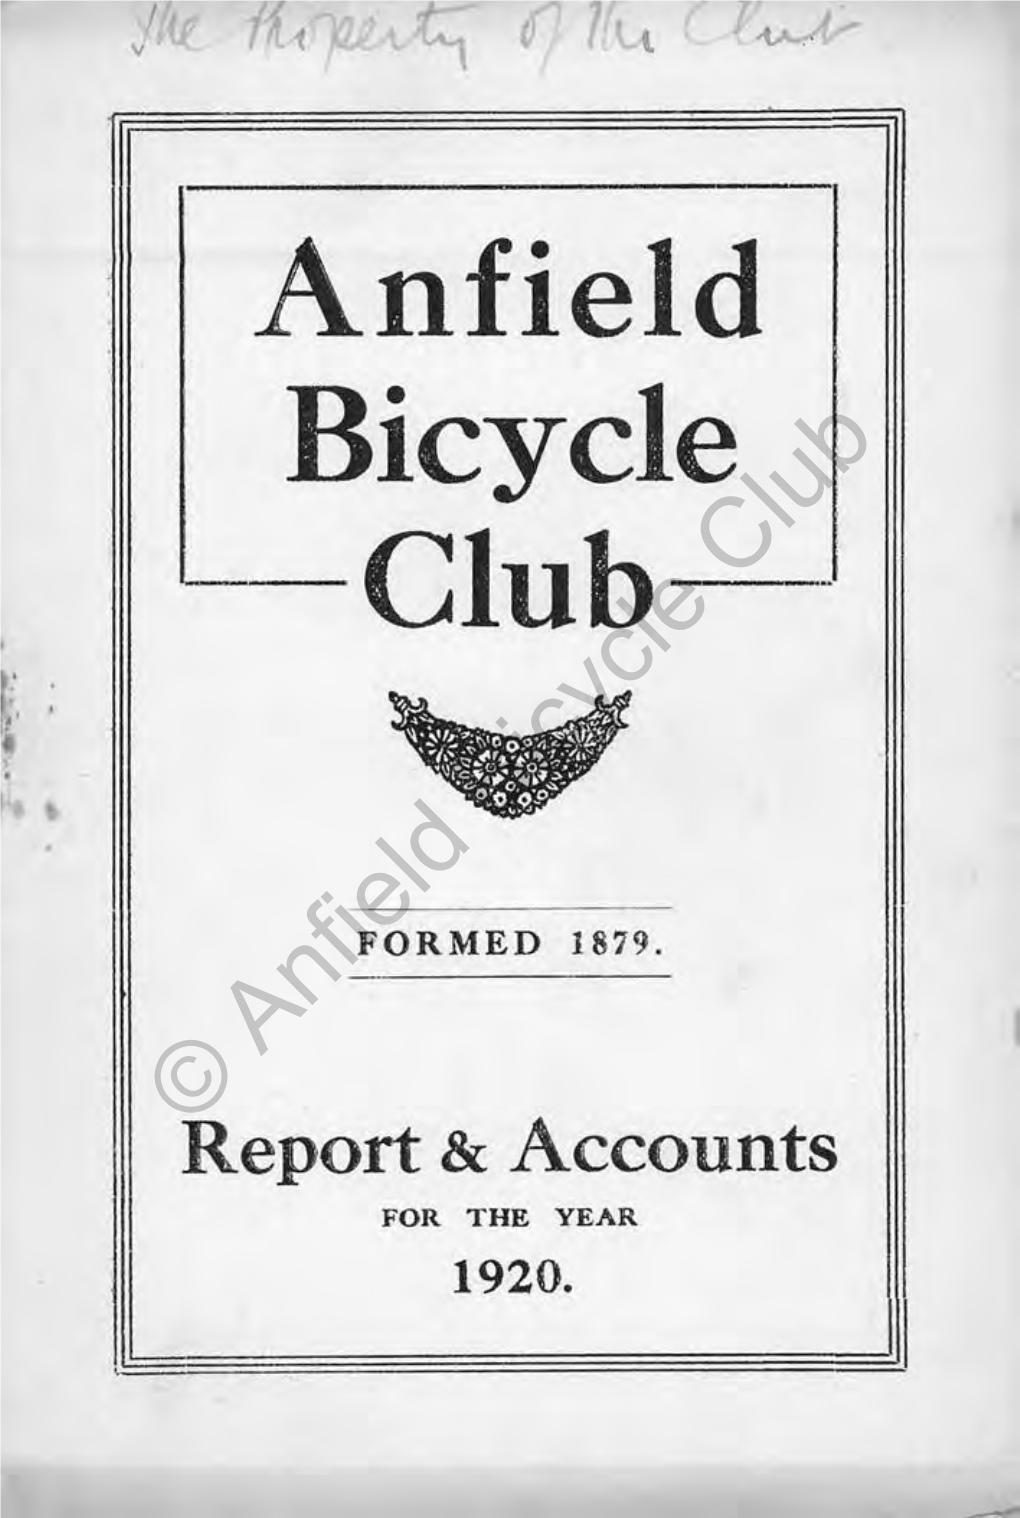 Anfield Bicycle Club Annual Report